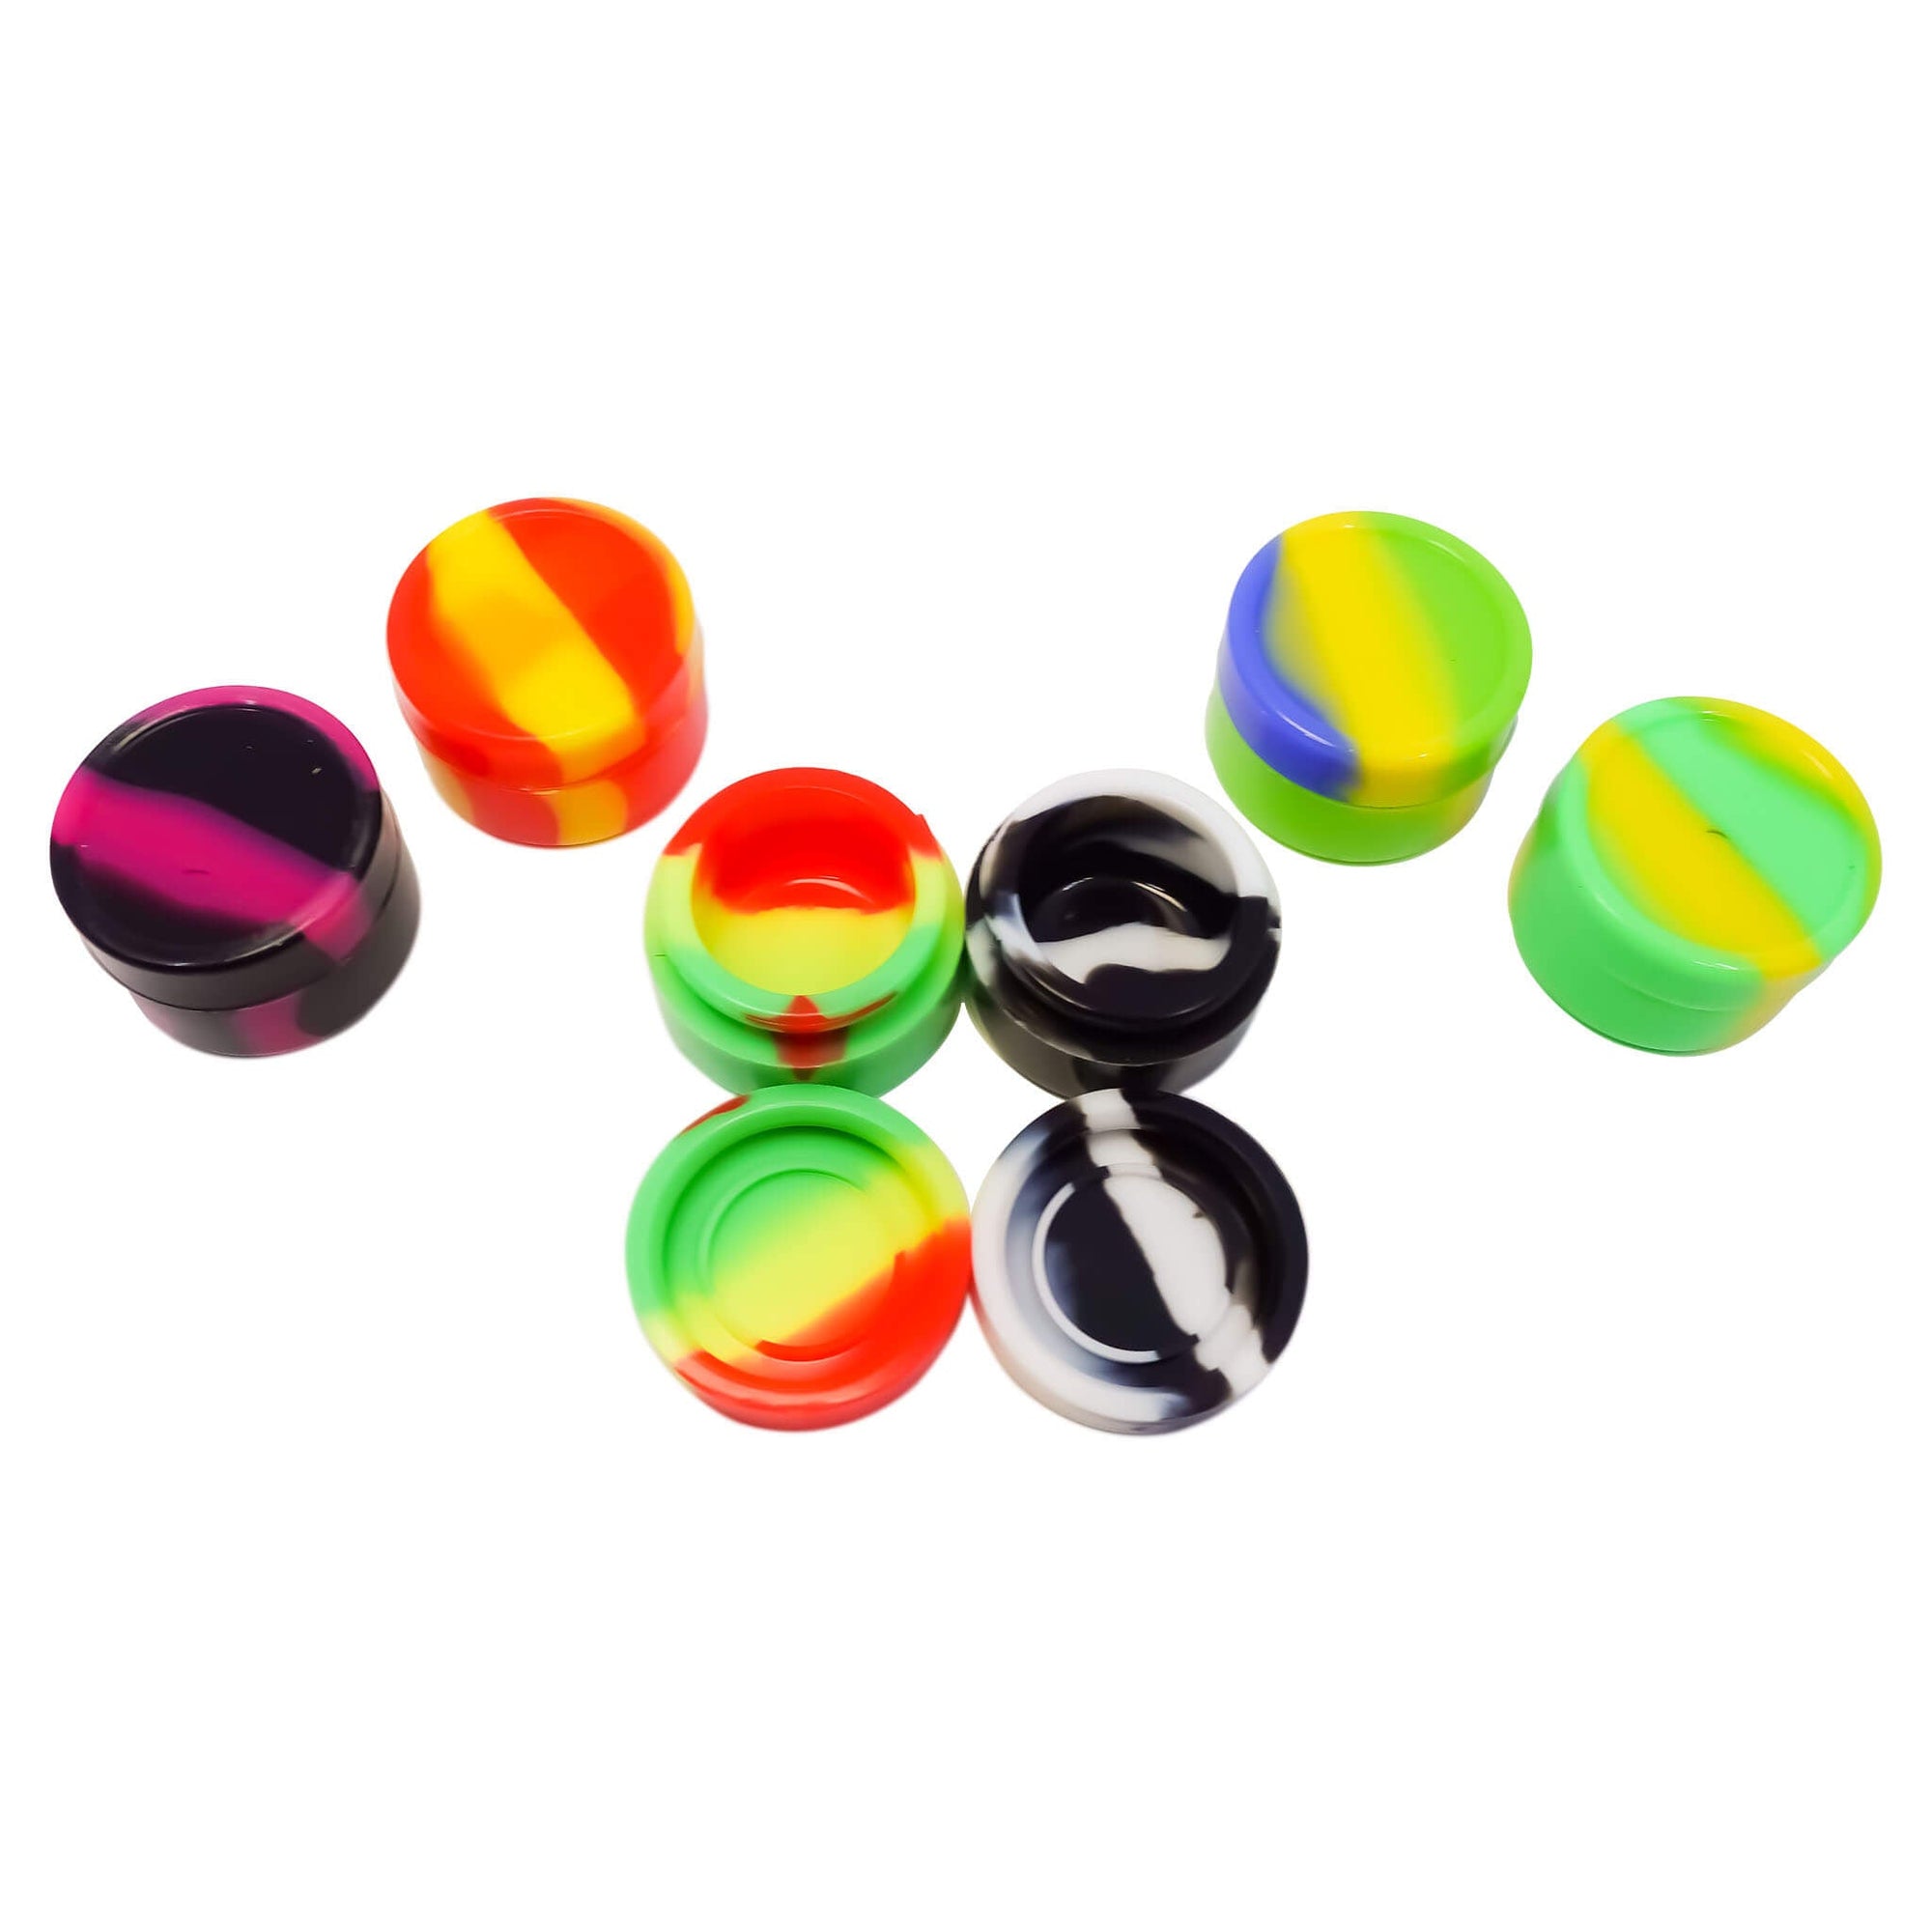 Colorful Silicone Dab Container | Open & Closed Lids View | Dabbing Warehouse